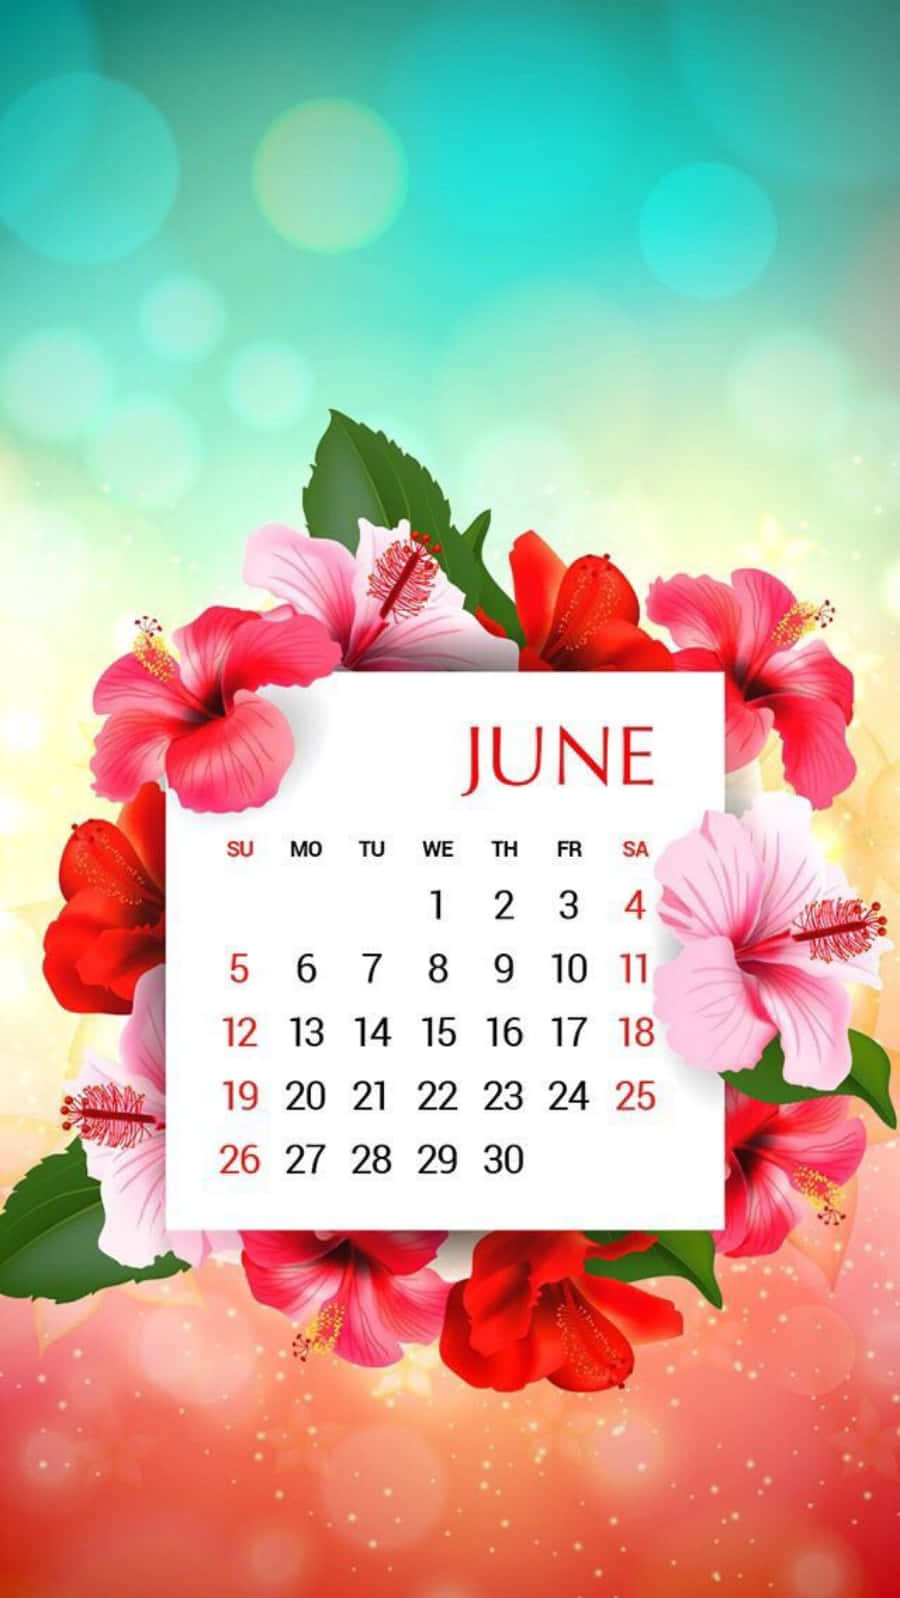 June Calendar With Flowers On A Background